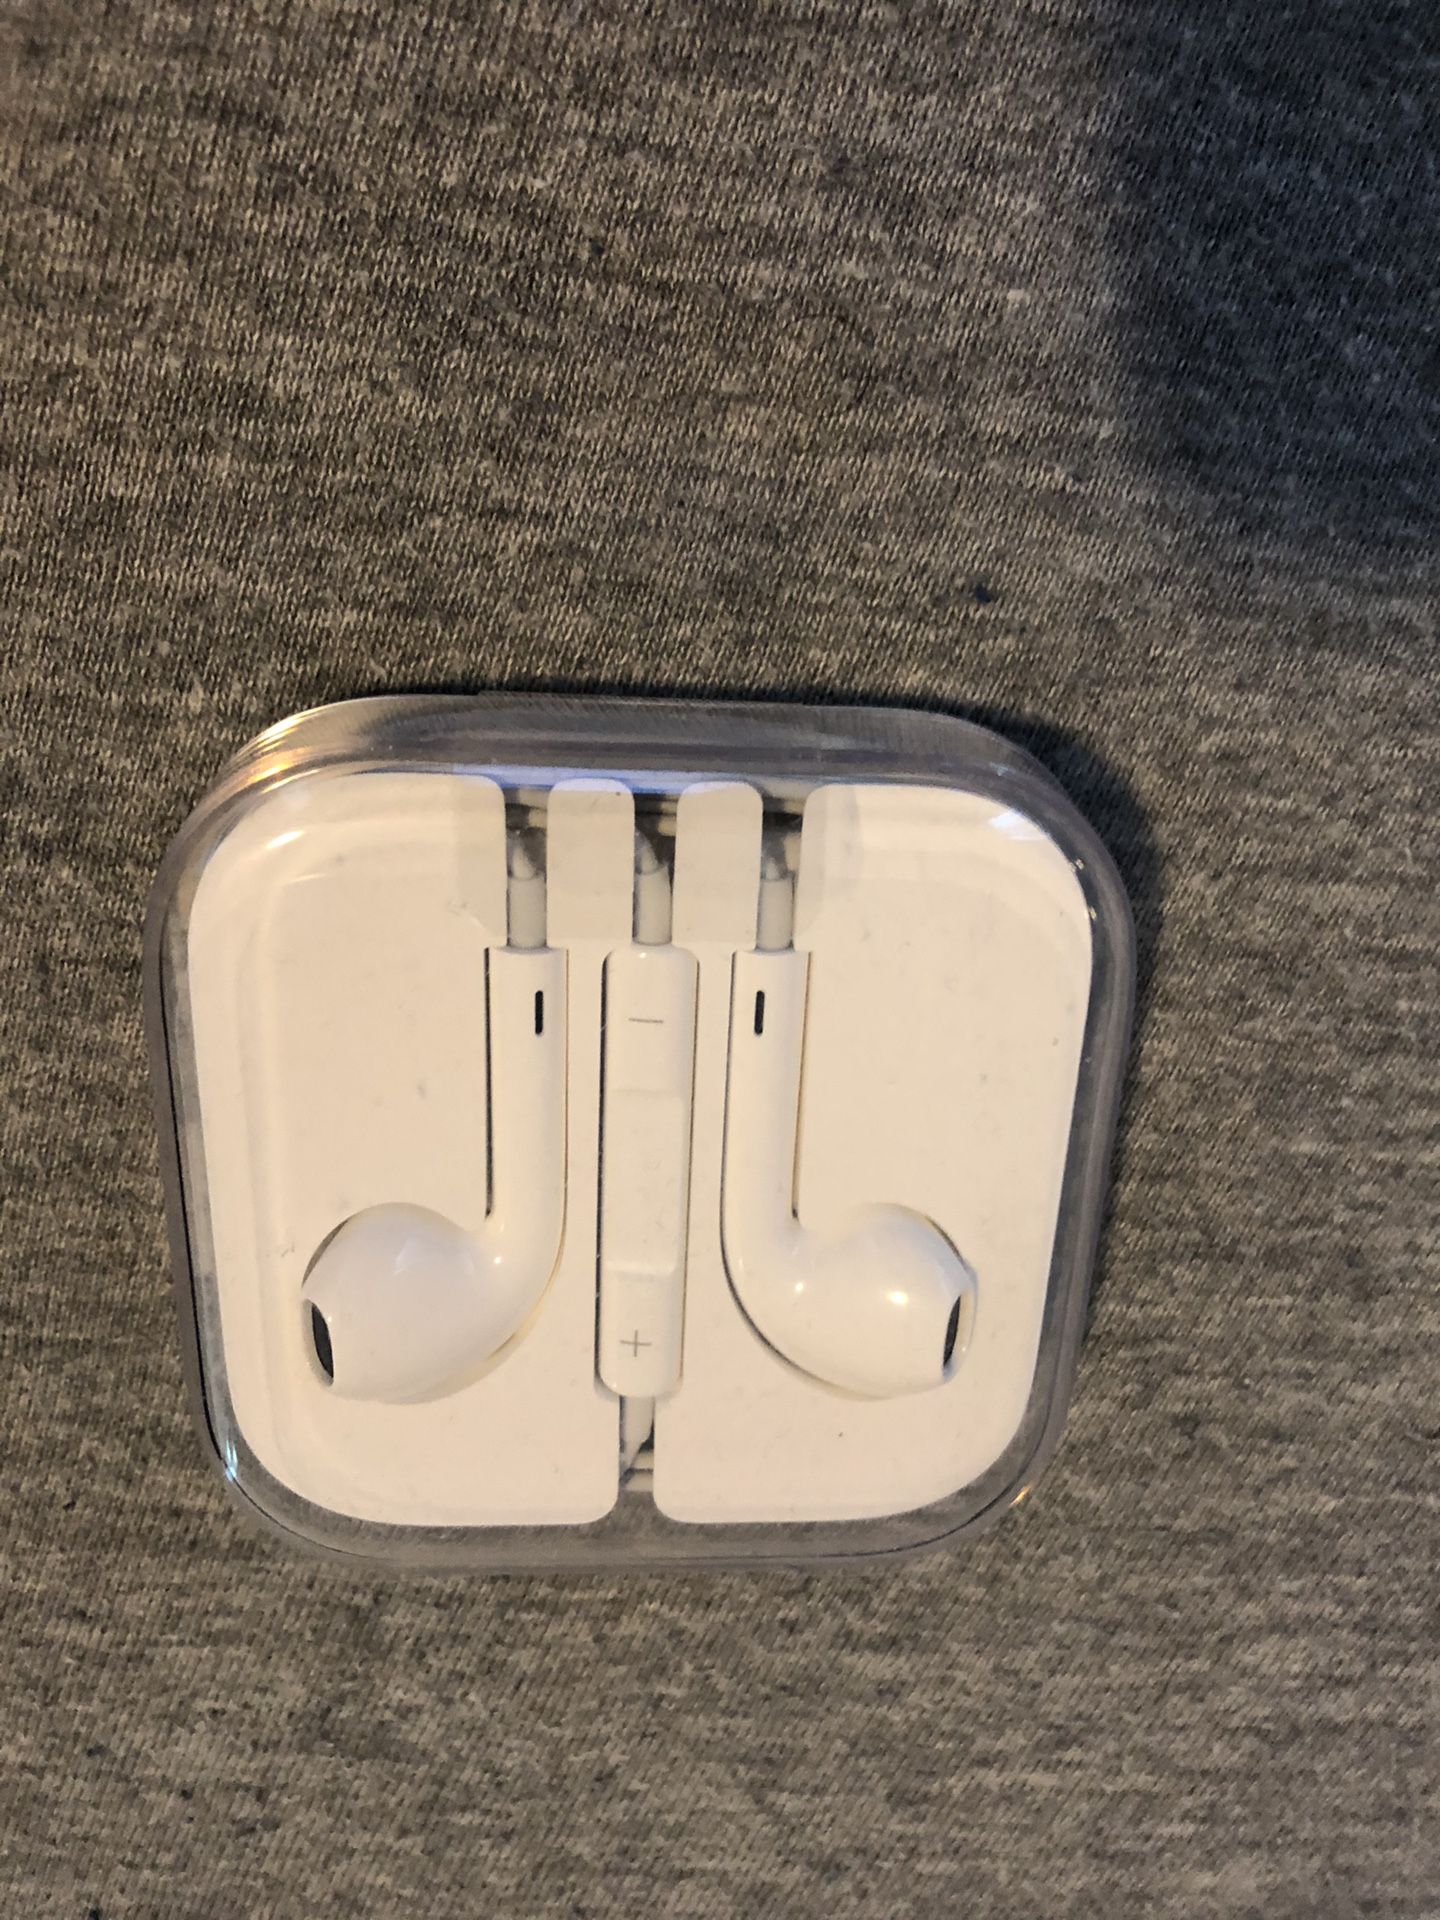 Apple EarPods with 3.5mm connector